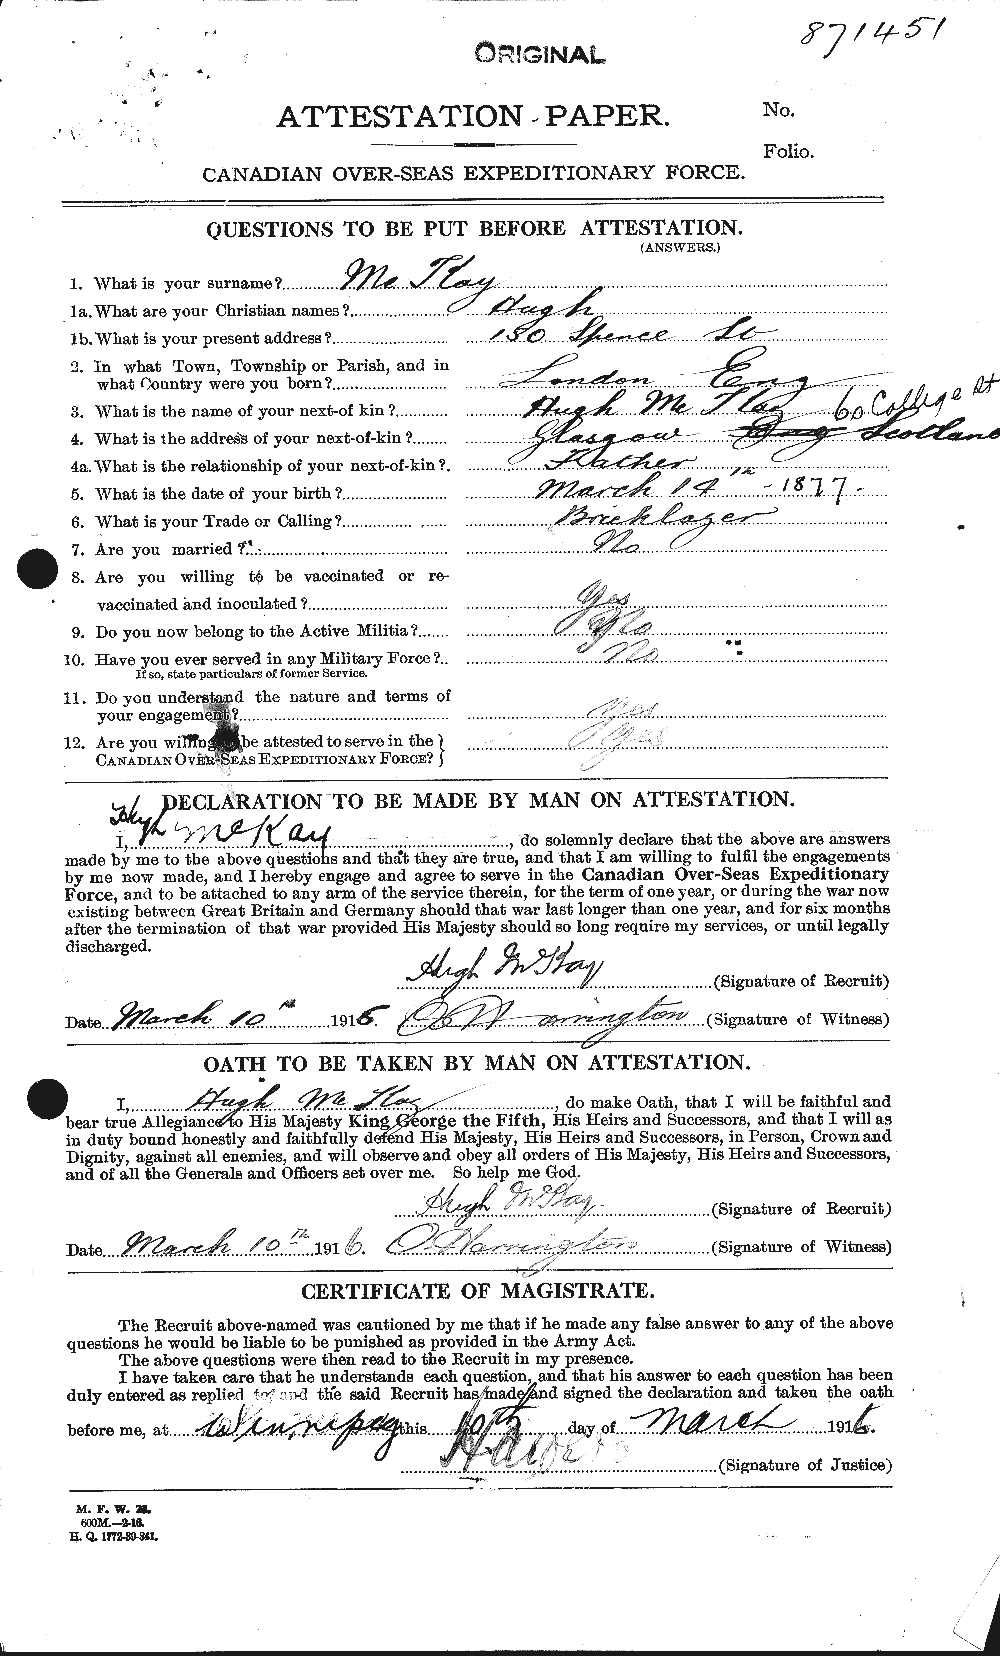 Personnel Records of the First World War - CEF 534764a